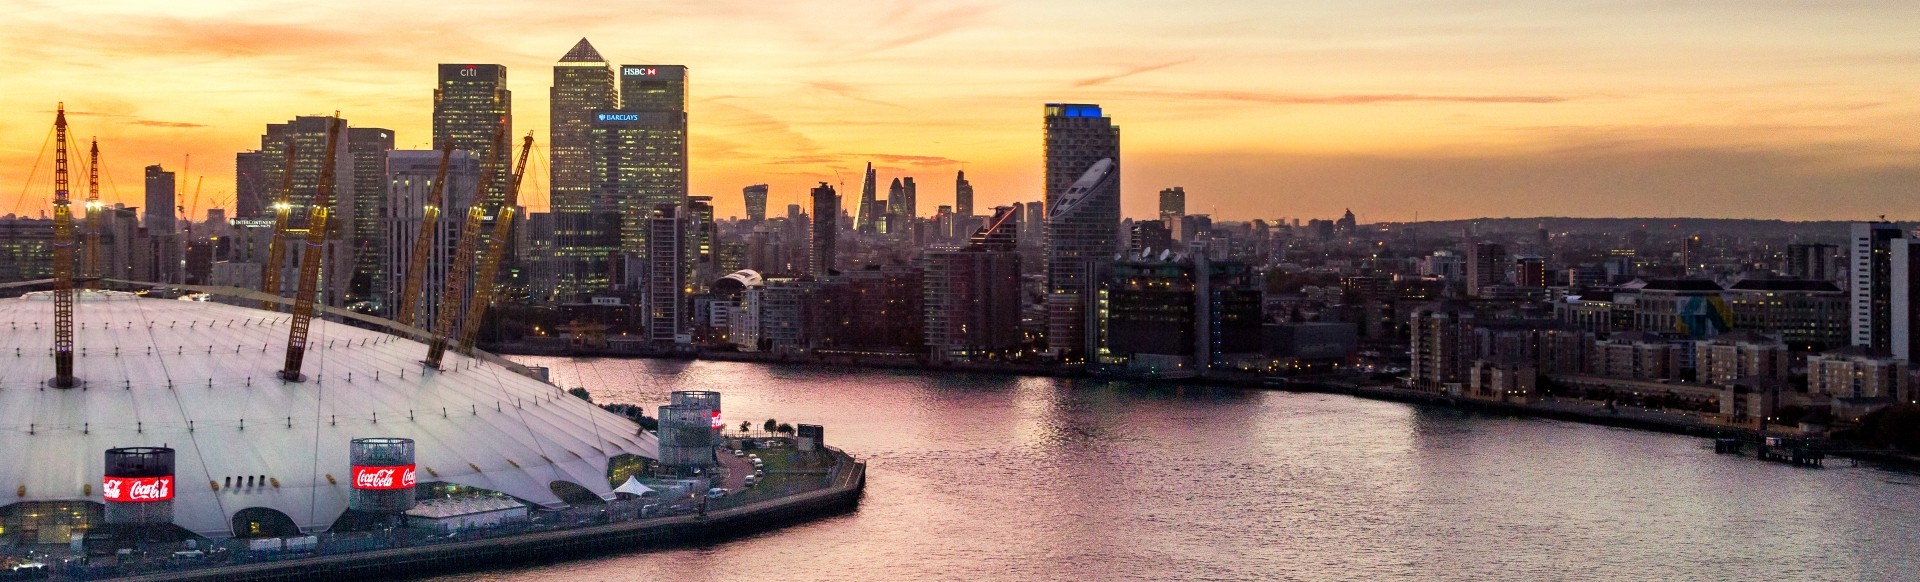 Sunset over the river Thames, The O2 and London’s skyline.